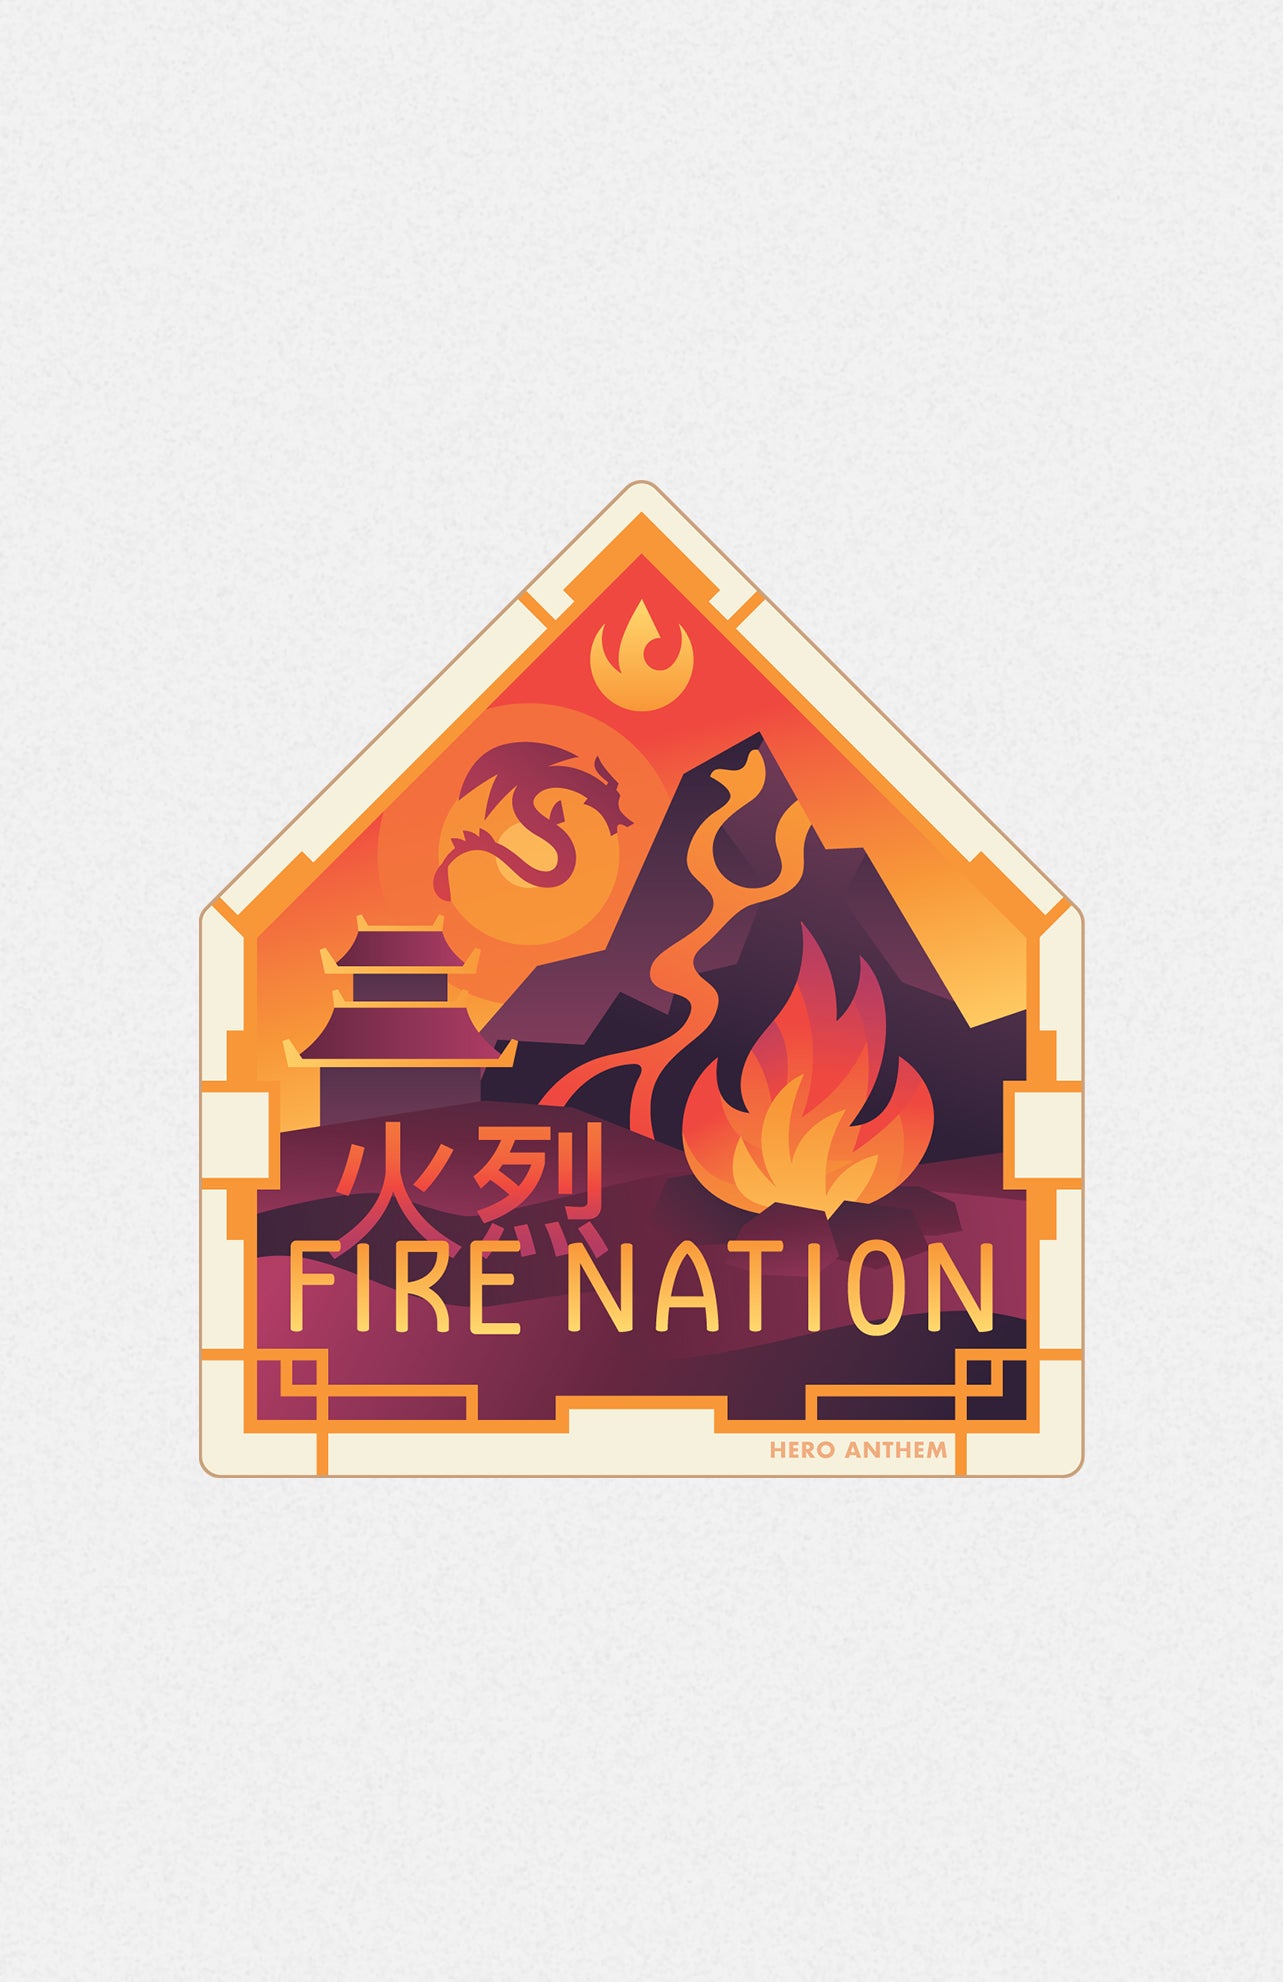 Air Nomads, Water Tribe, Fire Nation, Earth Kingdom Sticker for